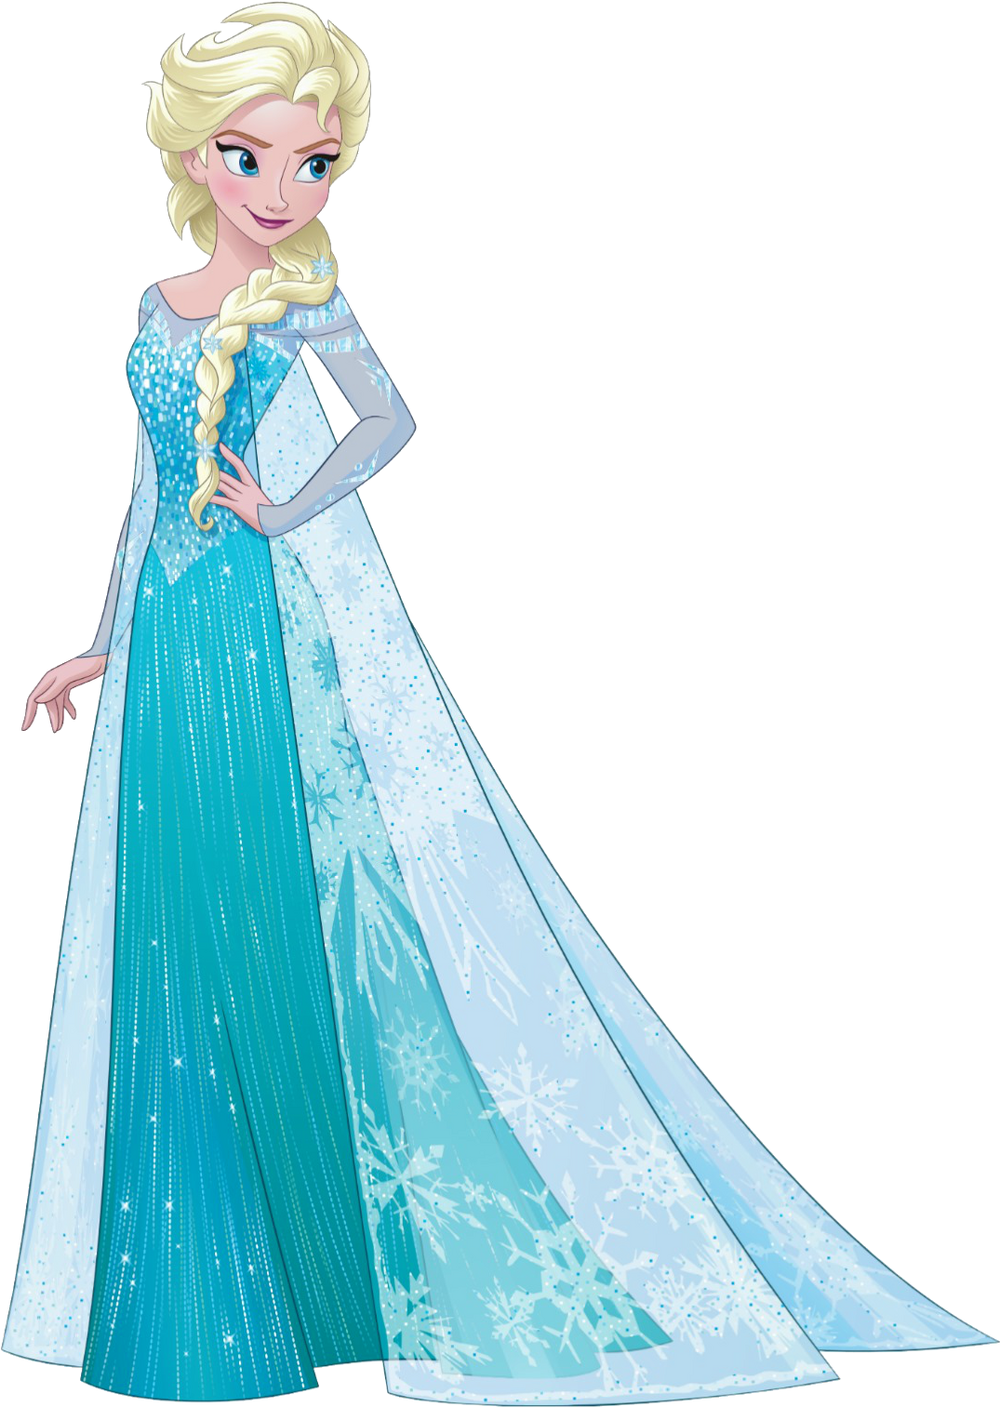 https://static.wikia.nocookie.net/disneyprincess/images/a/a9/1006_Sem_T%C3%ADtulo_20230213144220.png/revision/latest?cb=20230213145345